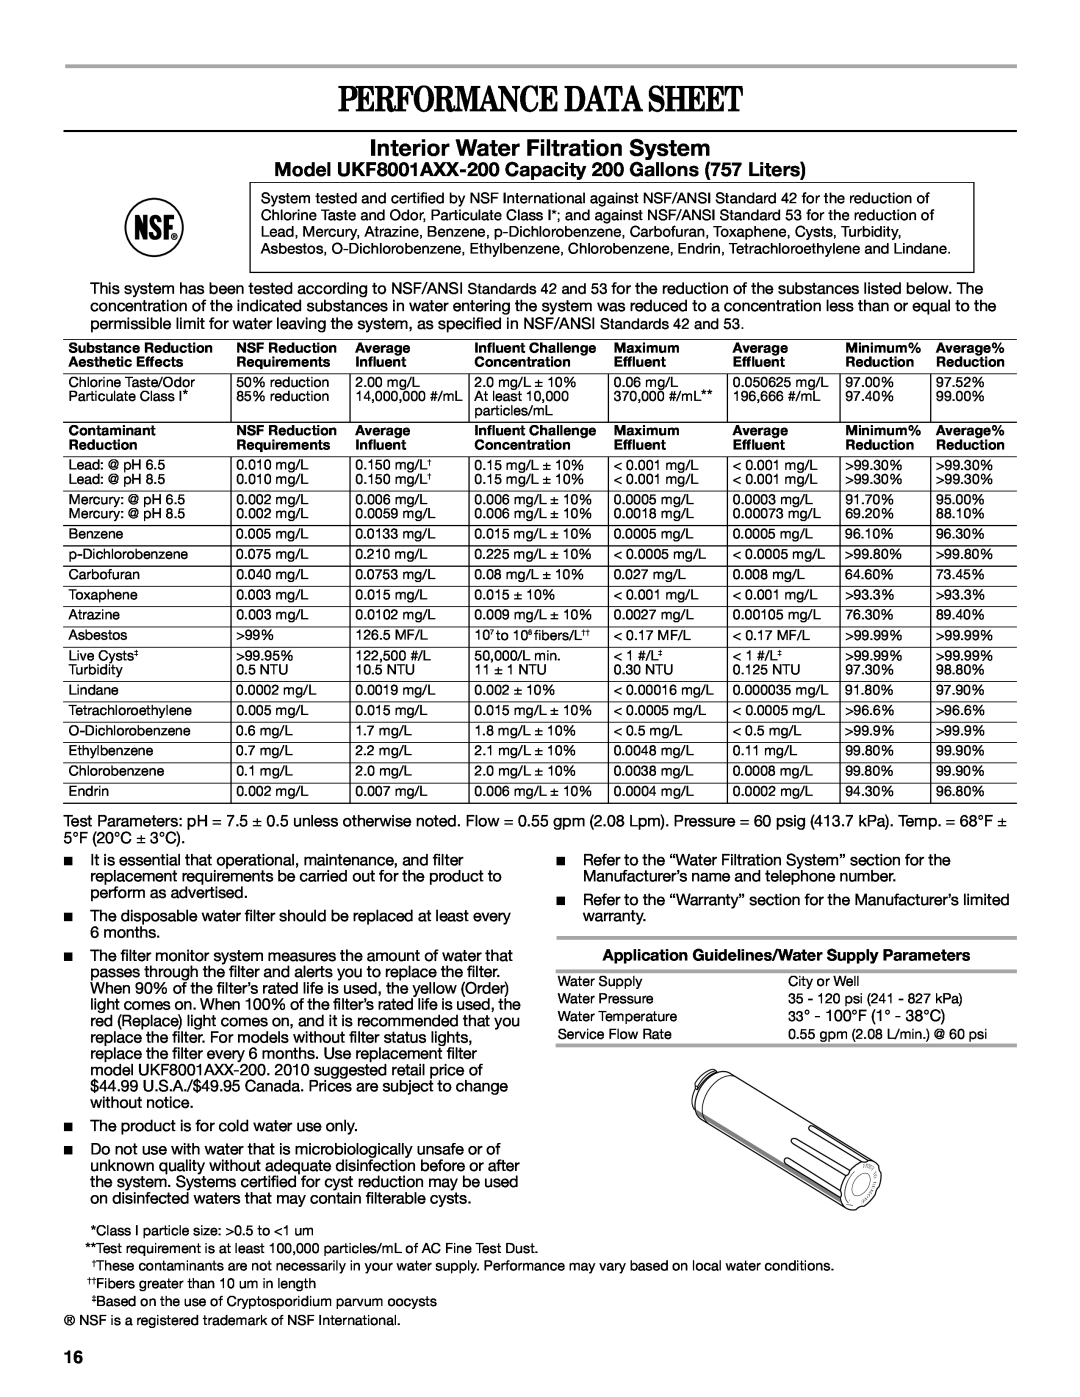 Whirlpool W10314956B installation instructions Performance Data Sheet, Interior Water Filtration System 